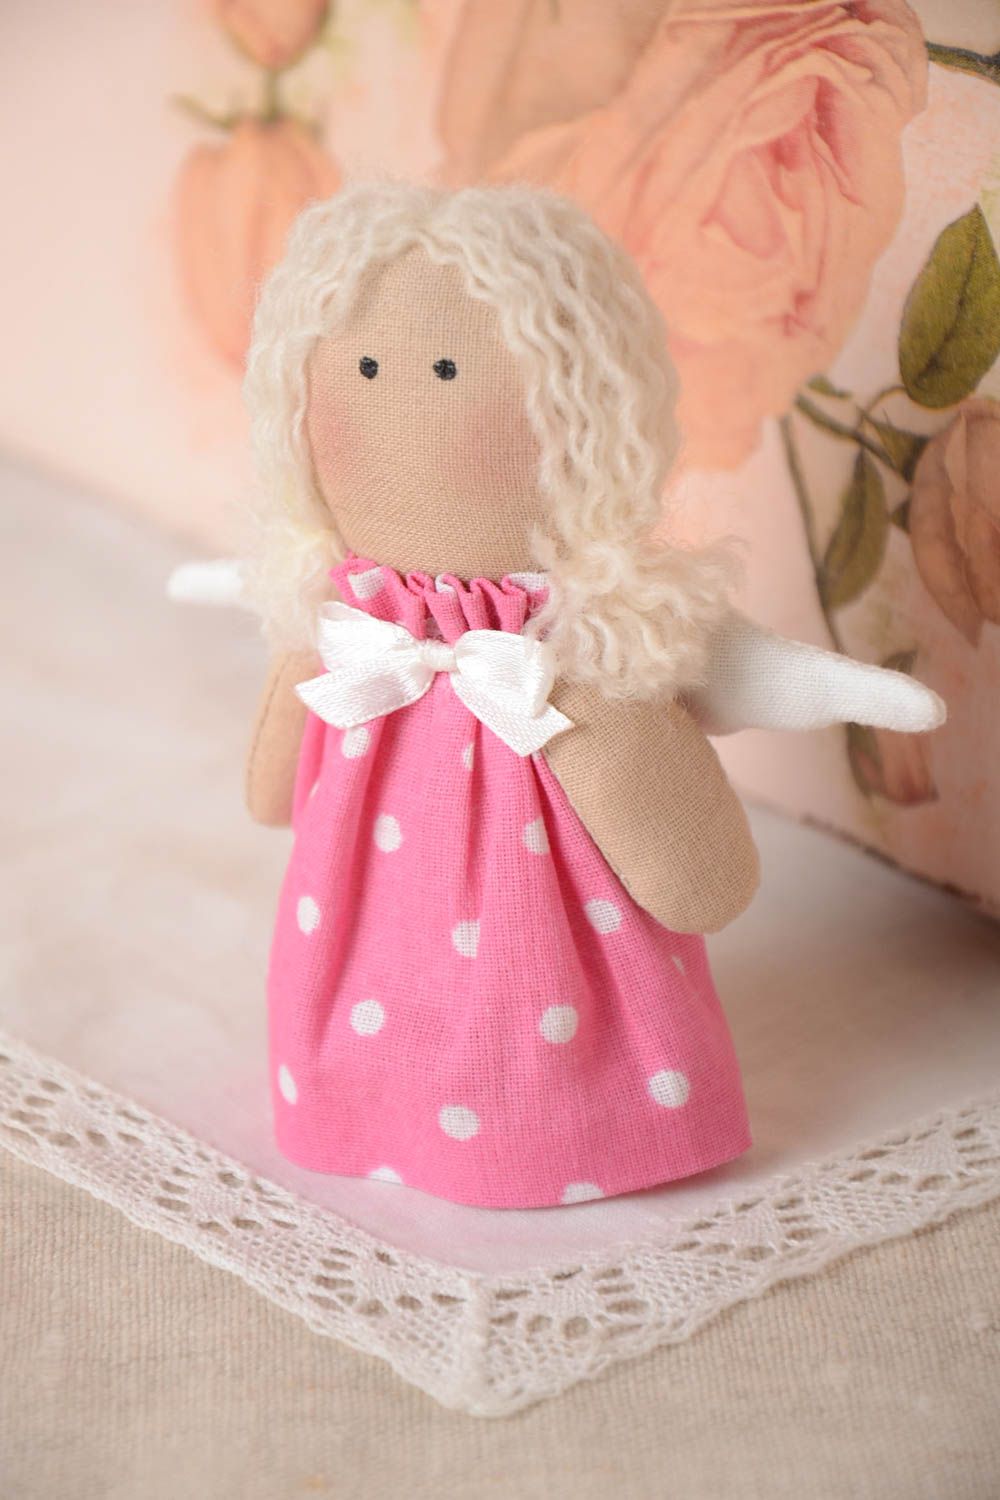 Small handmade soft toy collectible rag doll fabric stuffed toy designs photo 1